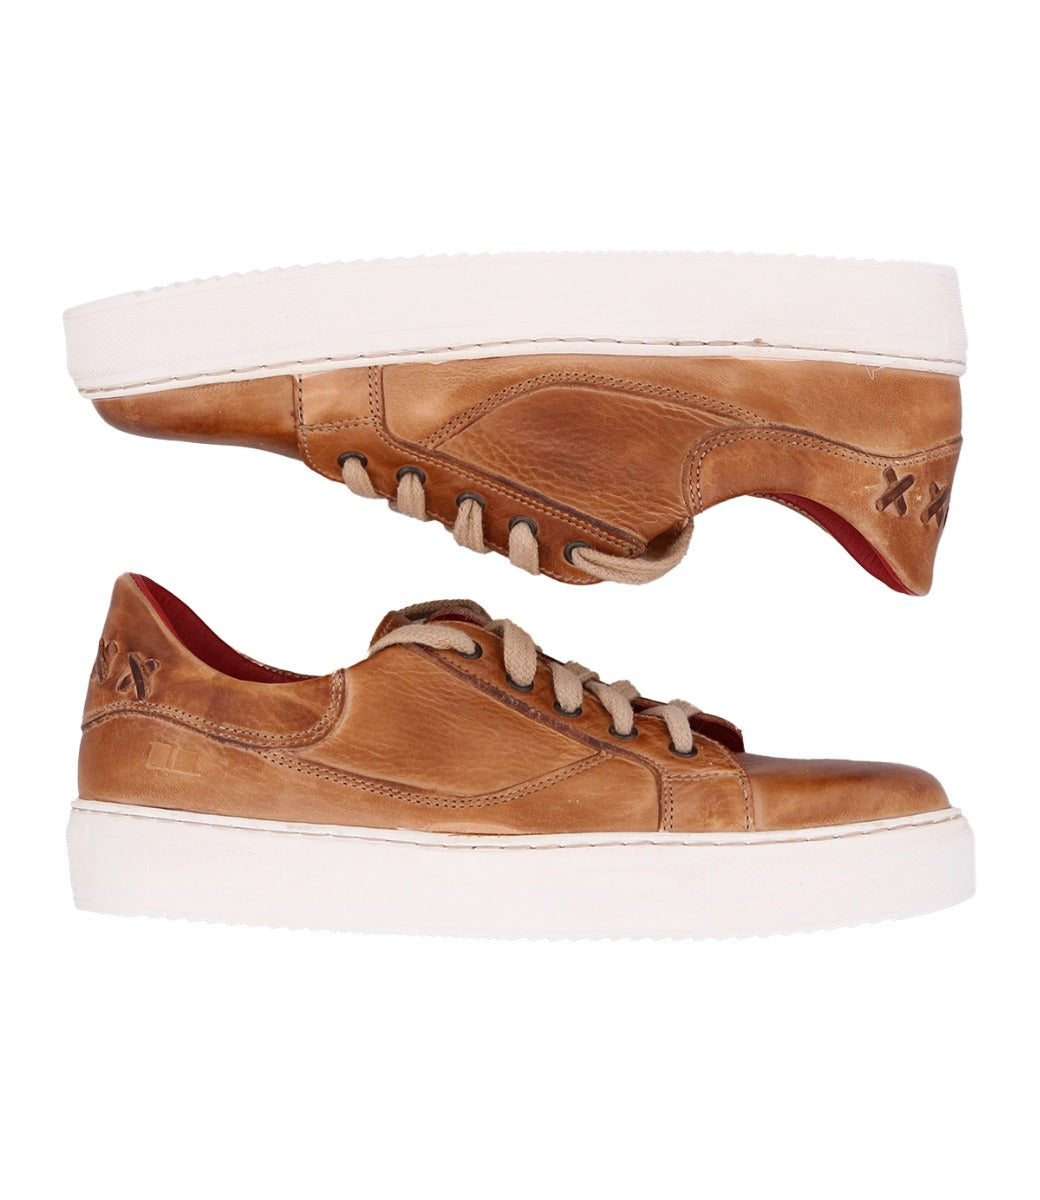 A pair of Azeli men's brown leather sneakers by Bed Stu.